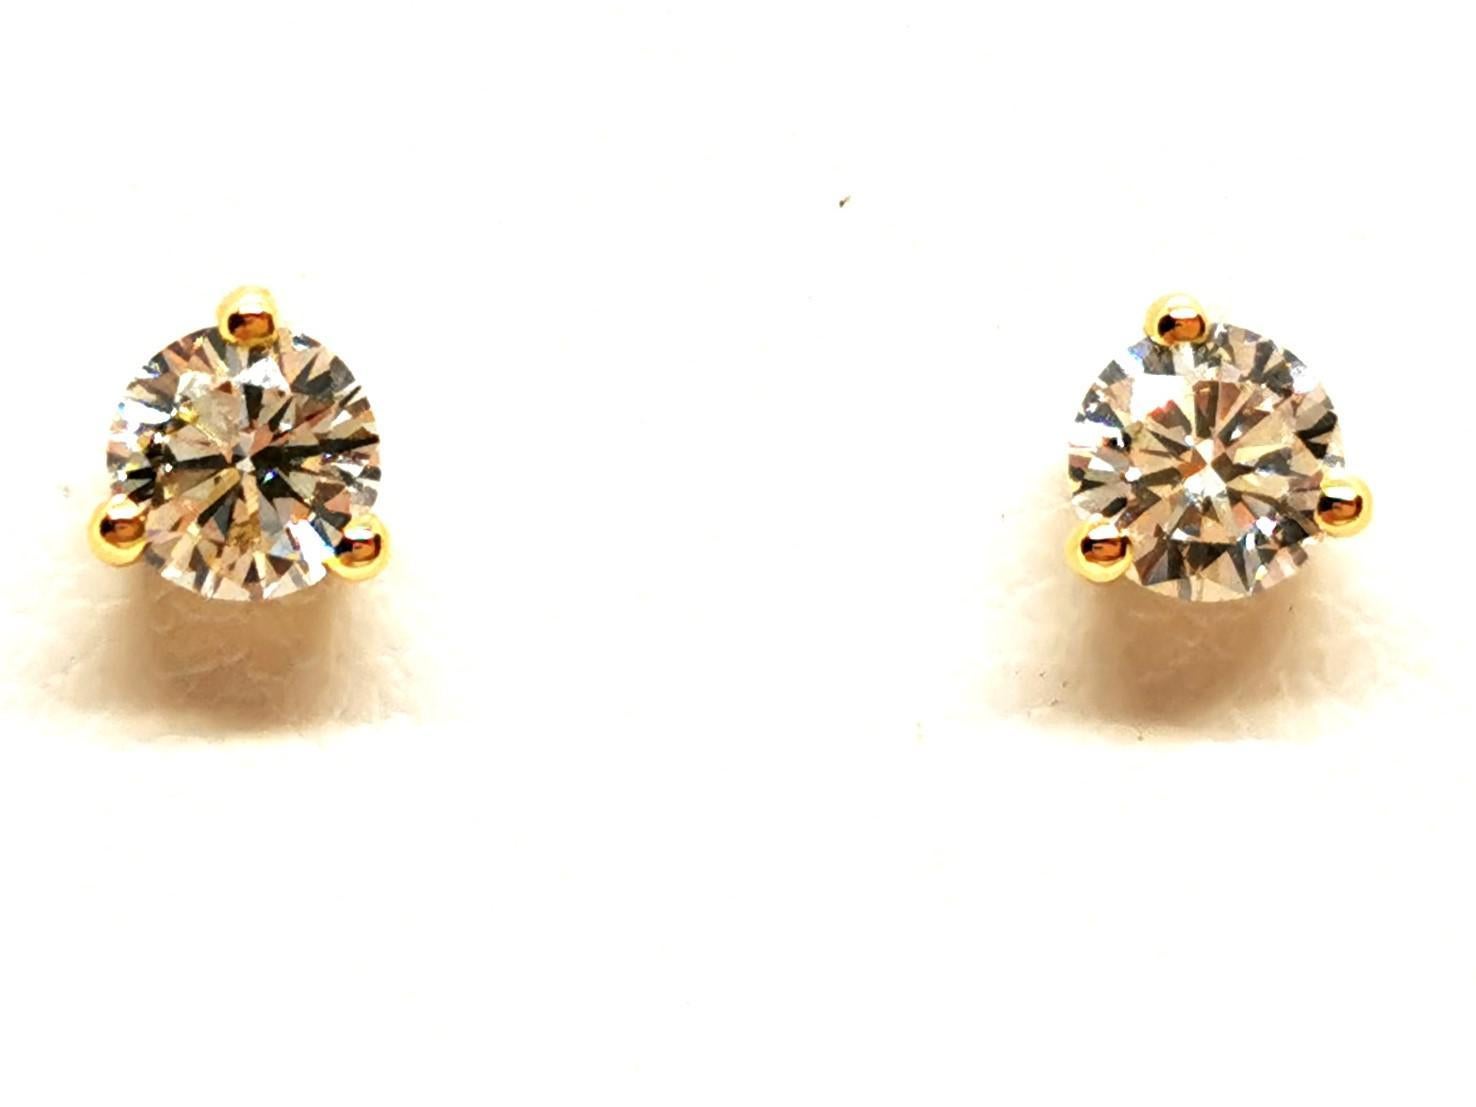 Earrings diamond chips. in yellow gold 750 thousandths (18 carats). set with two diamonds. brilliant cut. about 0.21 ct each. total weight diamonds: about 0.42 ct. set 3 claws. diameter: 0.43 cm x 0.43 cm. alpa clasp. excellent condition

